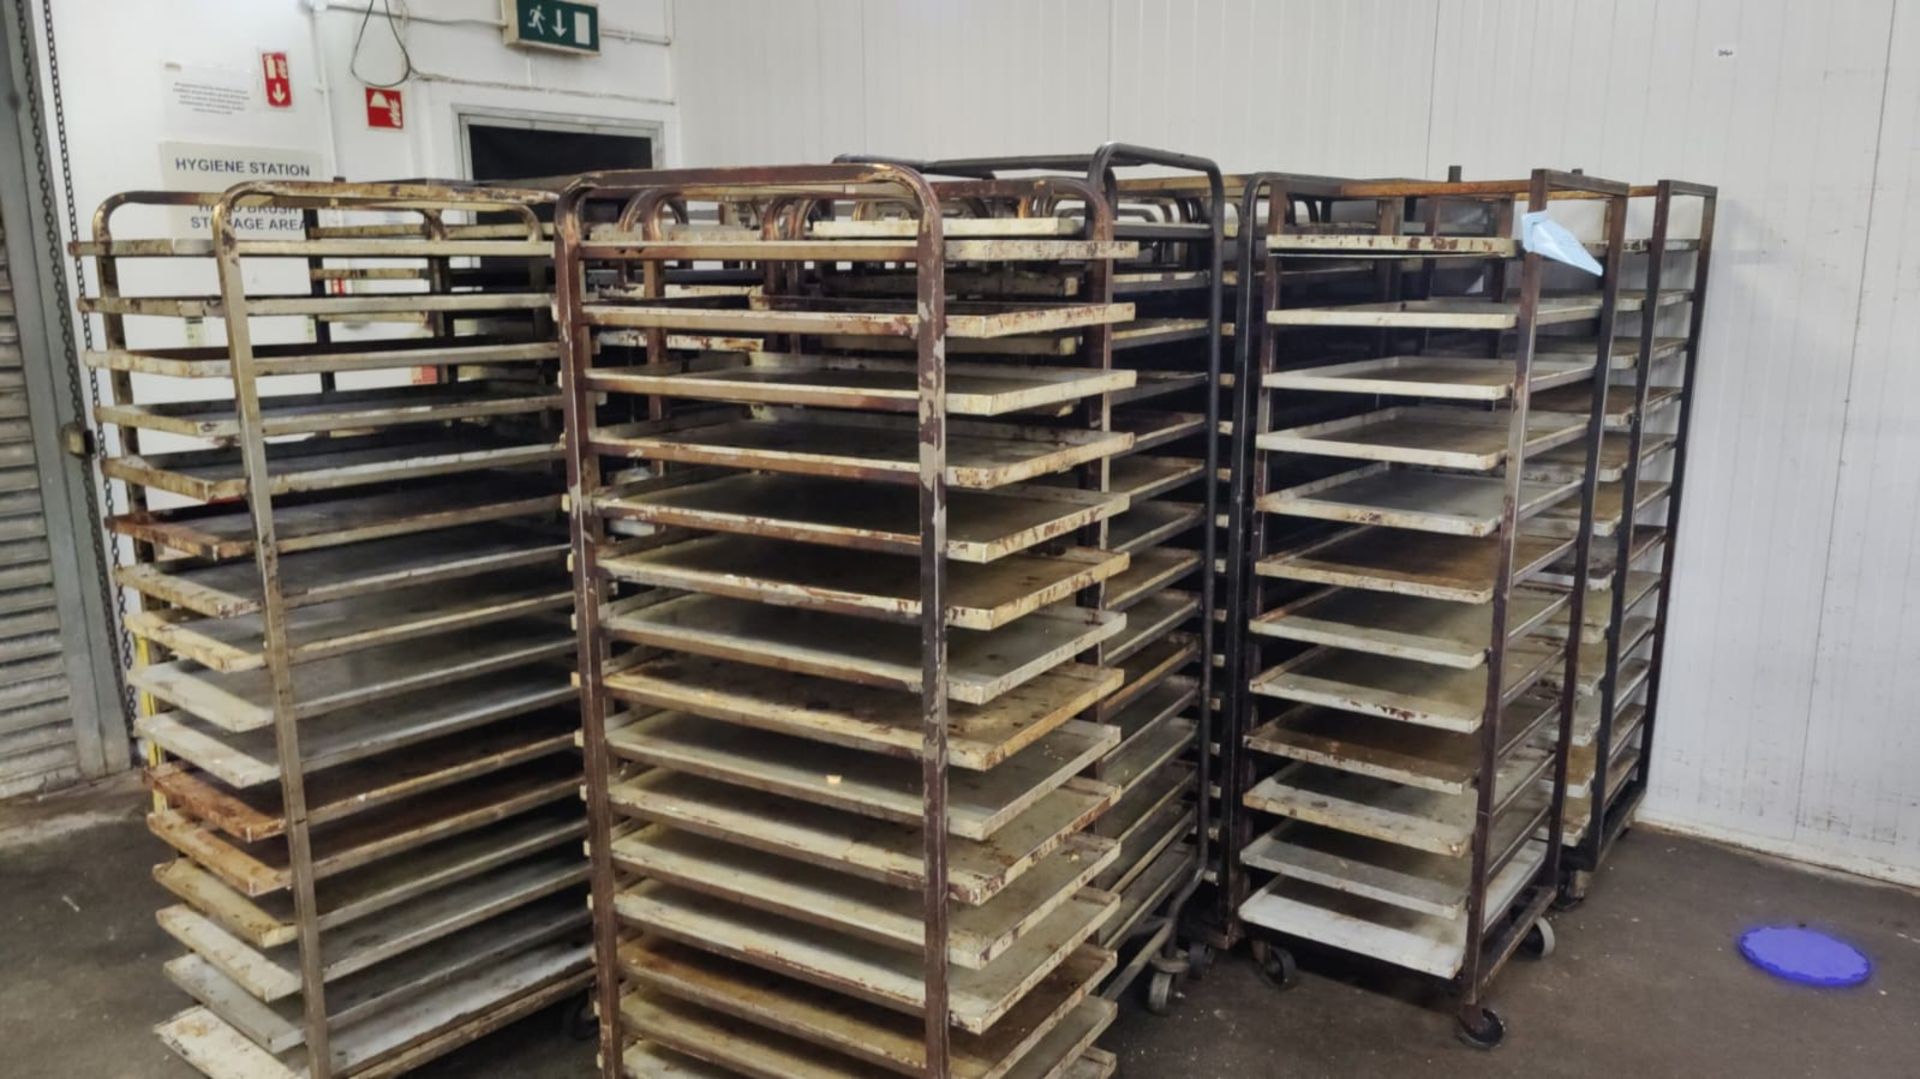 APPROX 16 OVEN RACKS WITH TRAYS (2040)